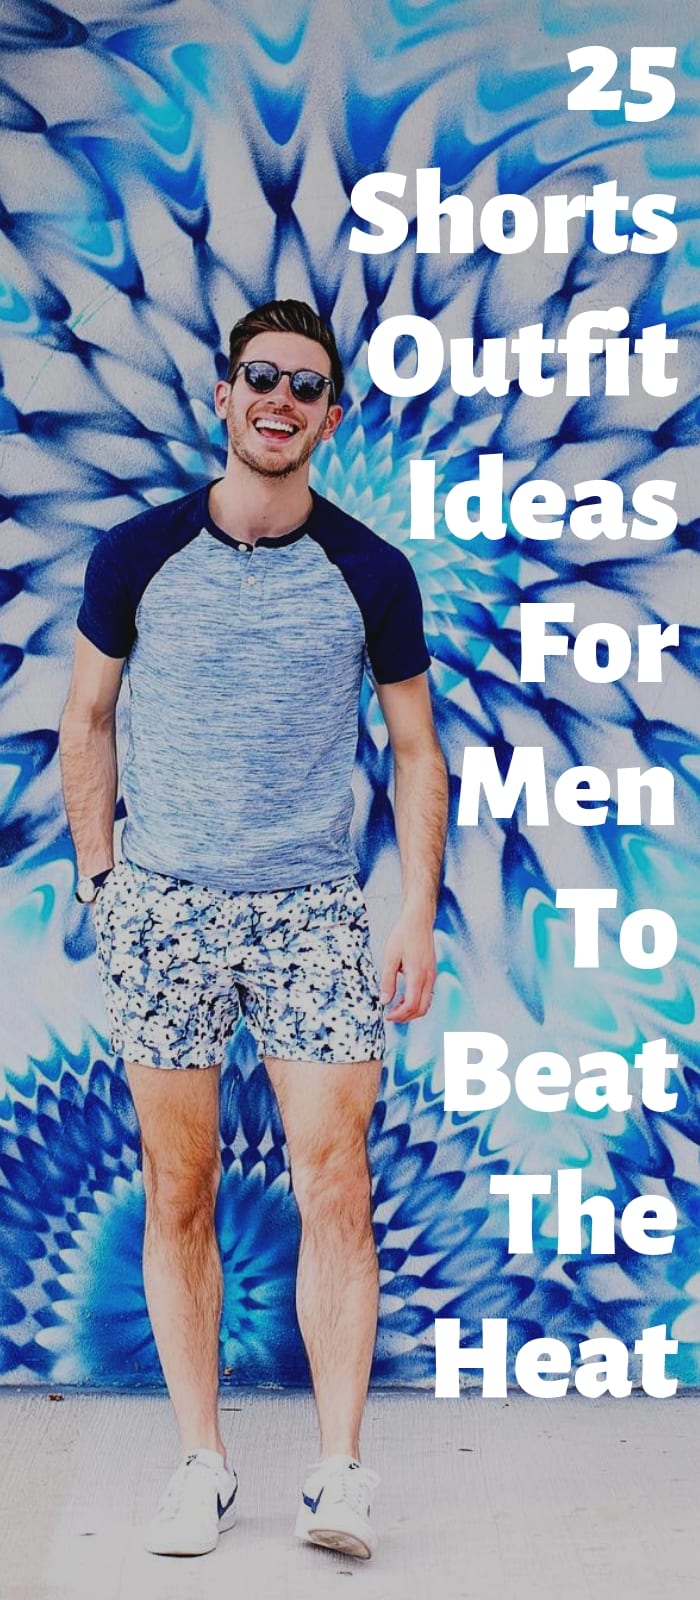 25 Shorts Outfit Ideas For Men To Beat The Heat!